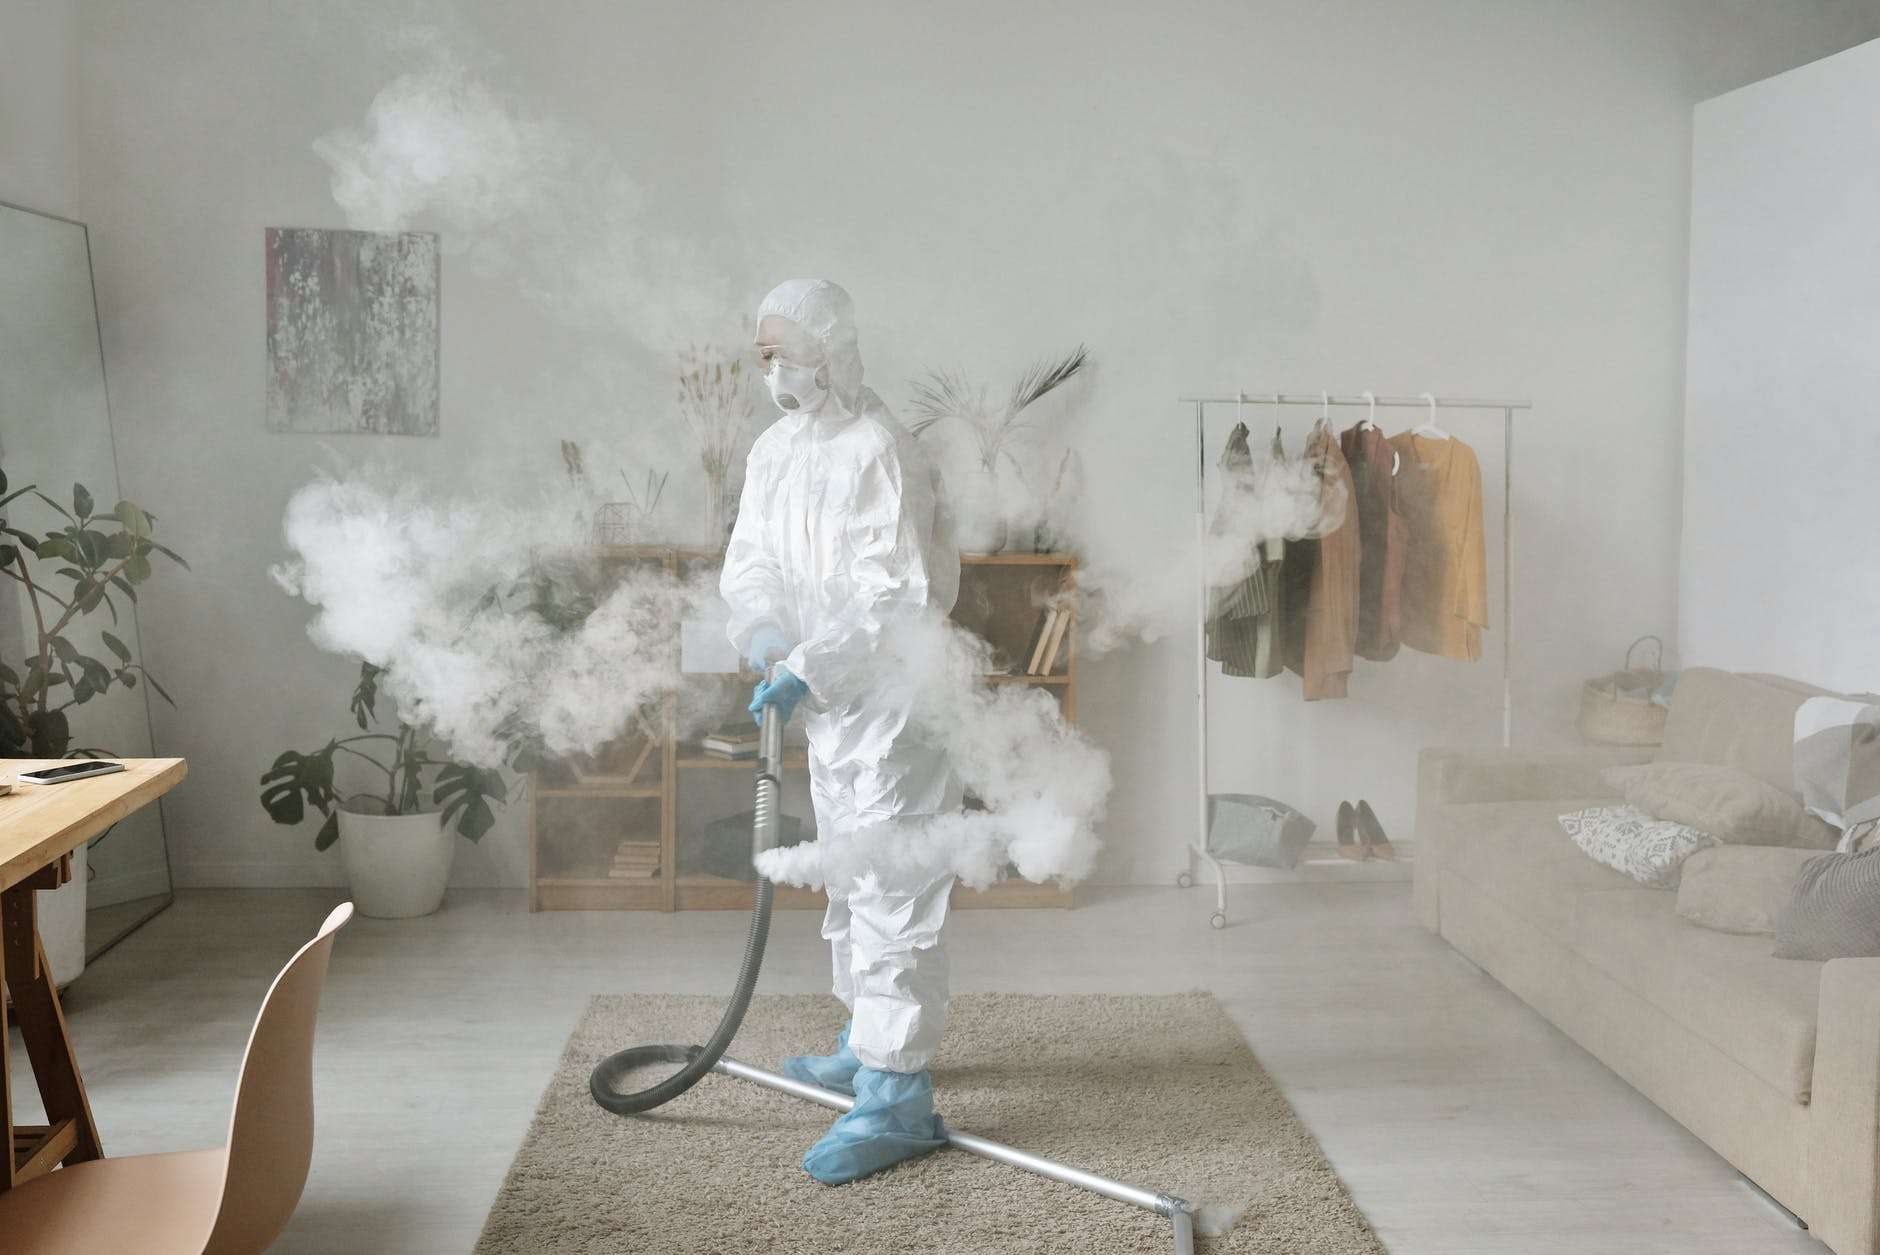 a person disinfecting while wearing a protective suit